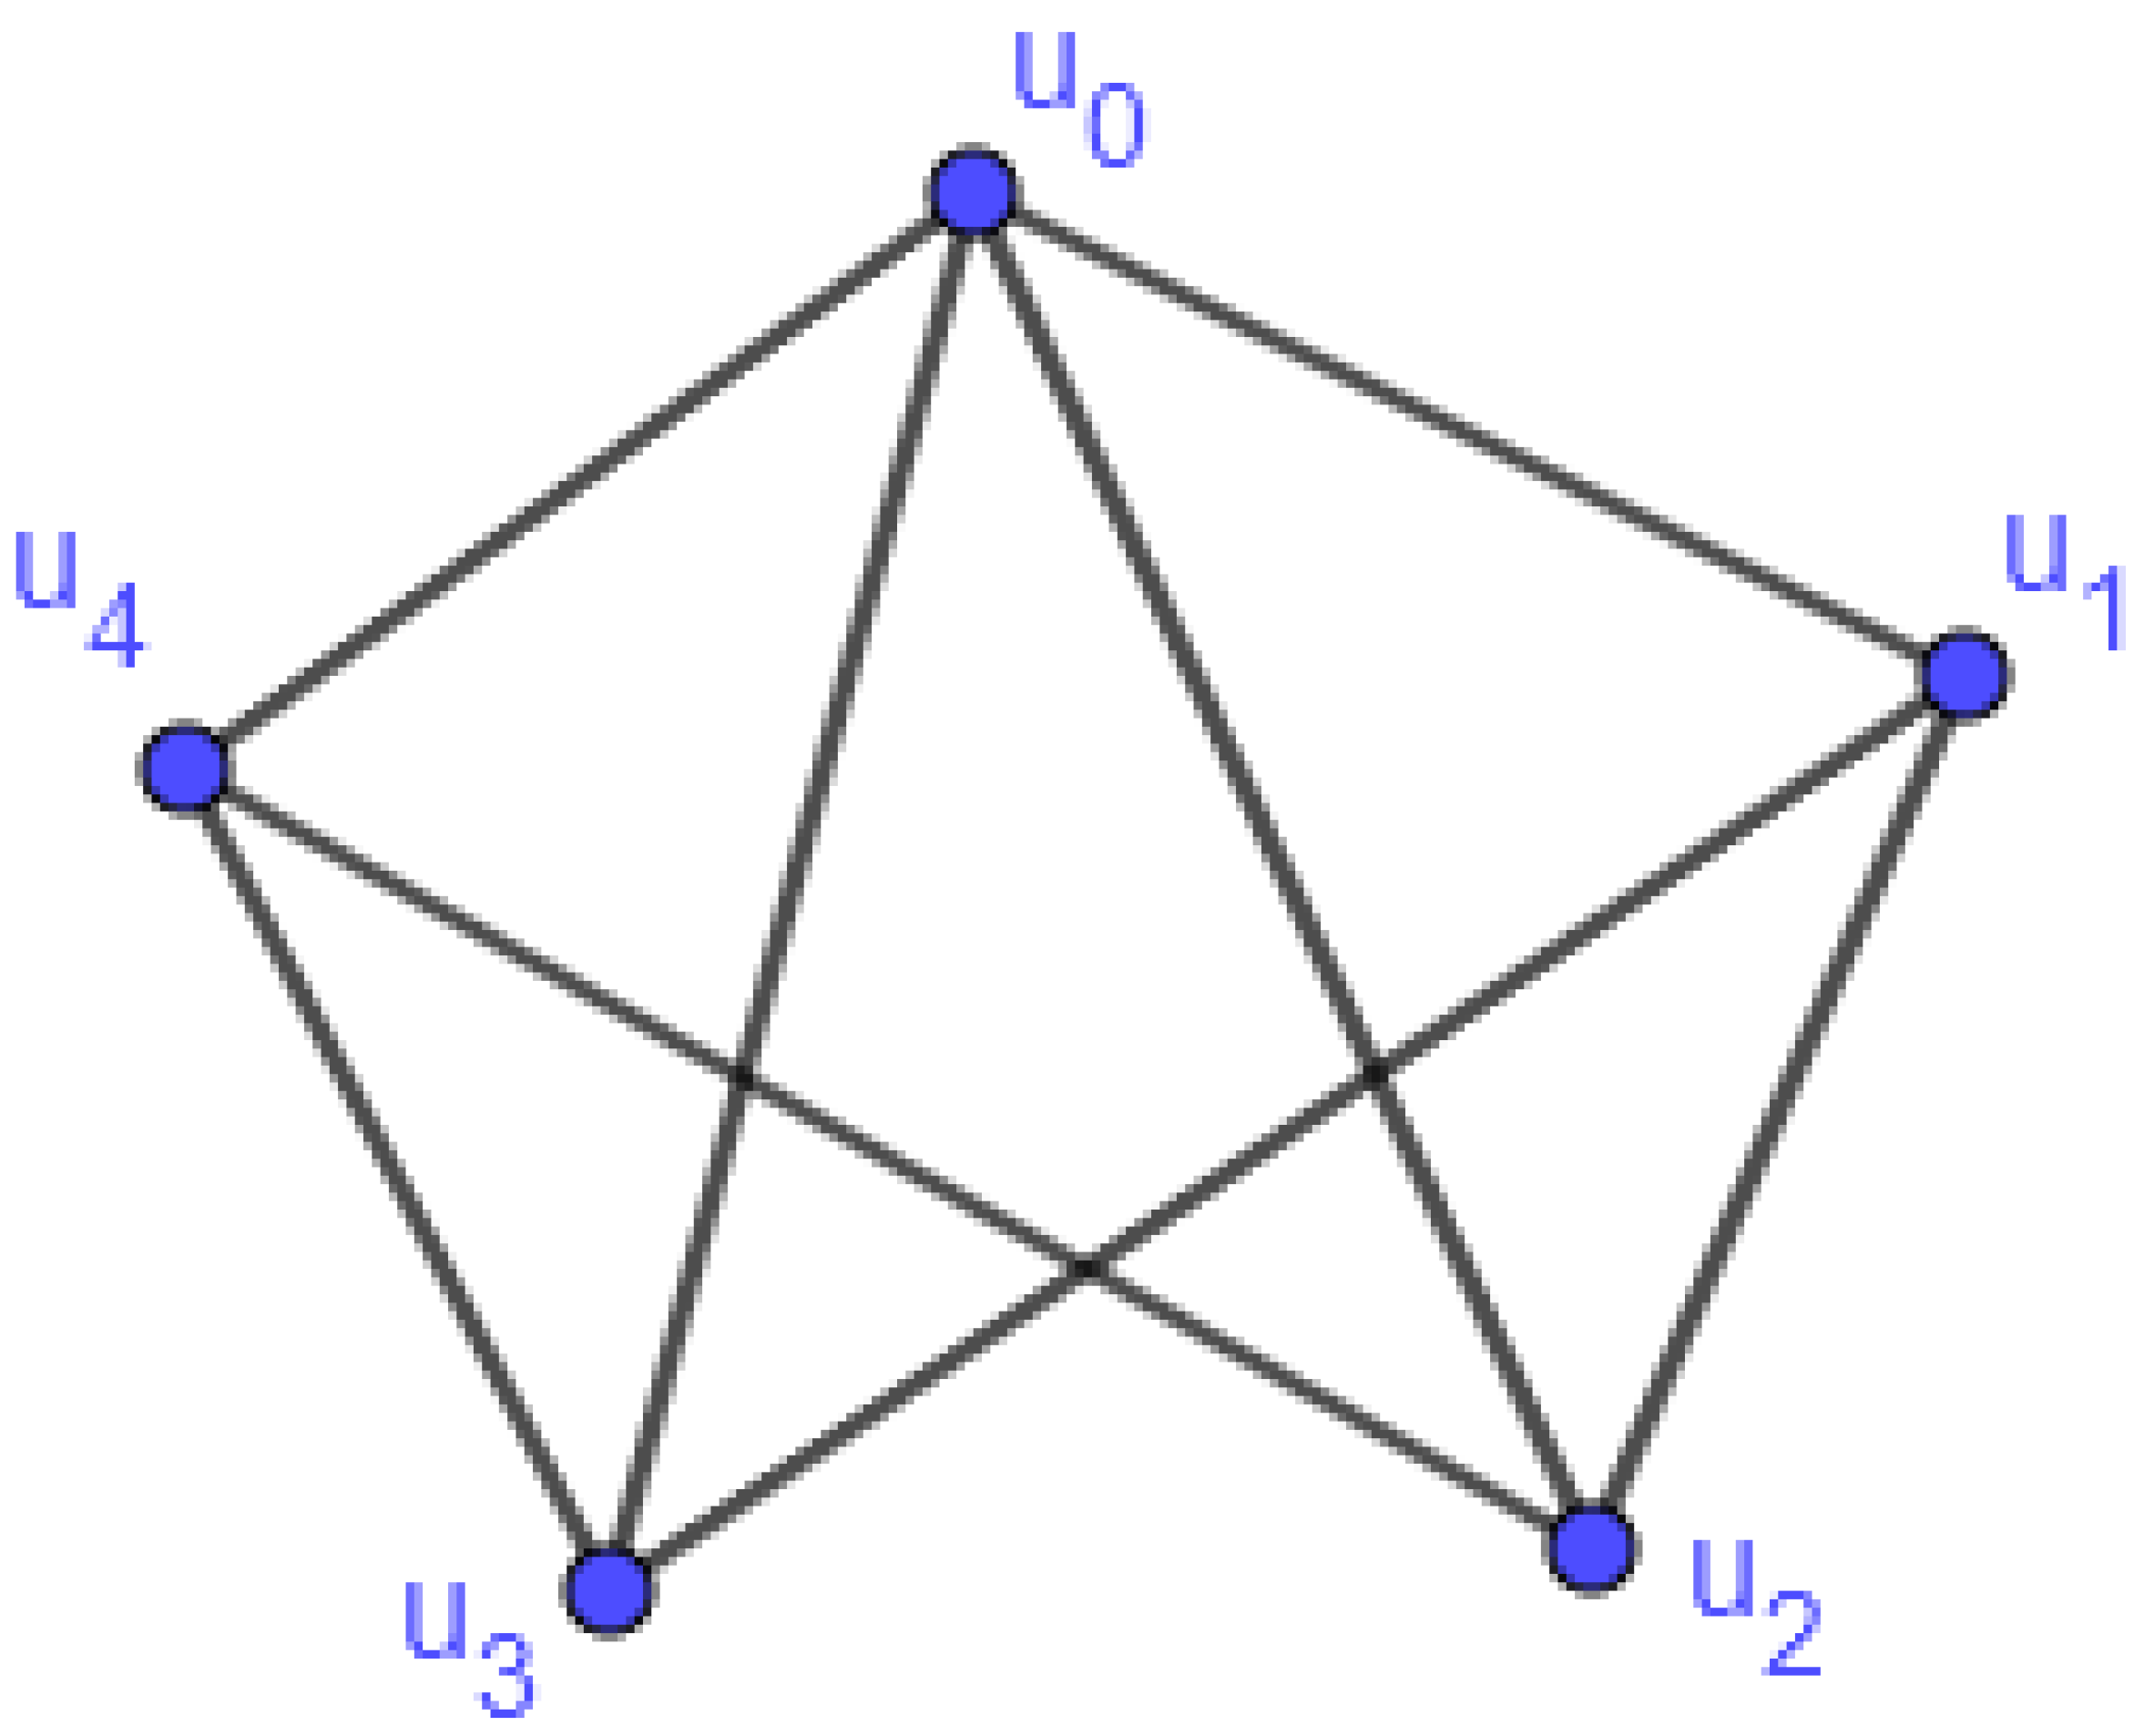 abstract algebra - Is the group of units of a finite ring cyclic? -  Mathematics Stack Exchange